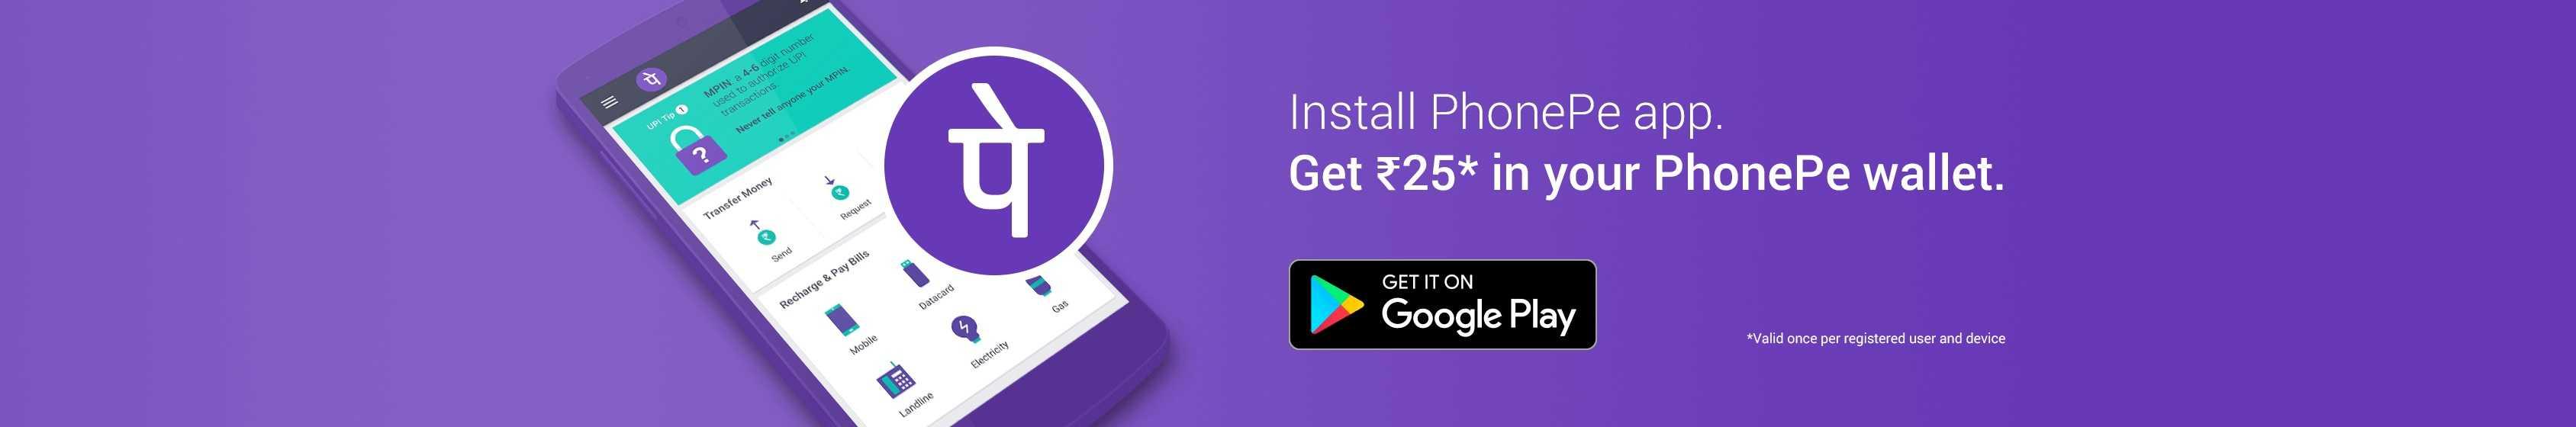 PhonePe App Mobile Recharge 20% Cashback 